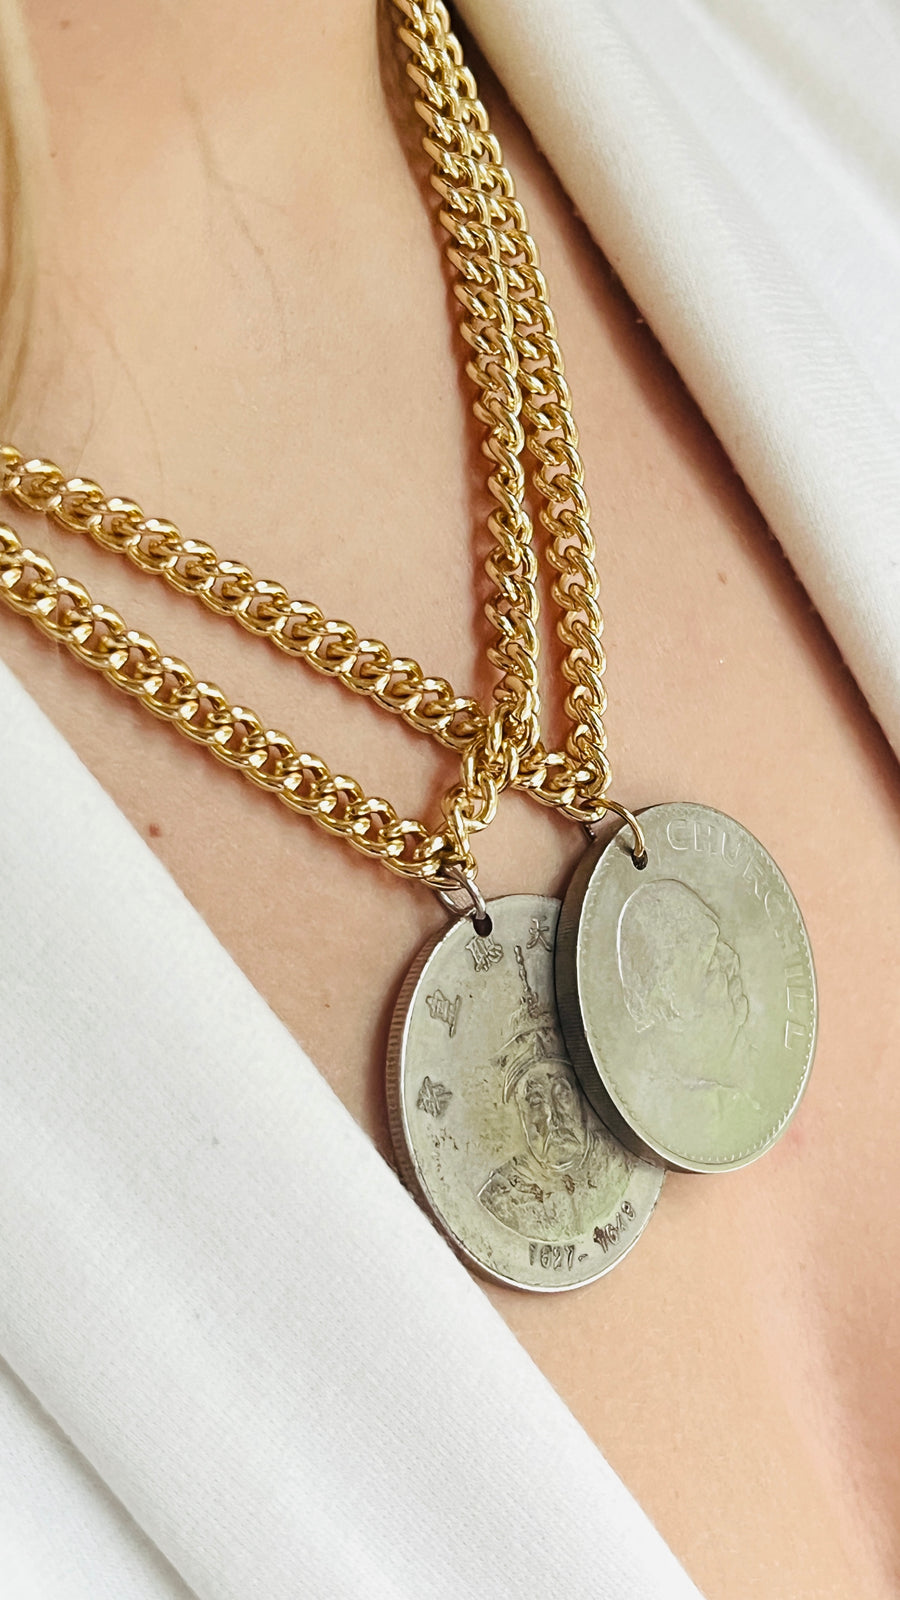 Silver coin necklace on gold chain